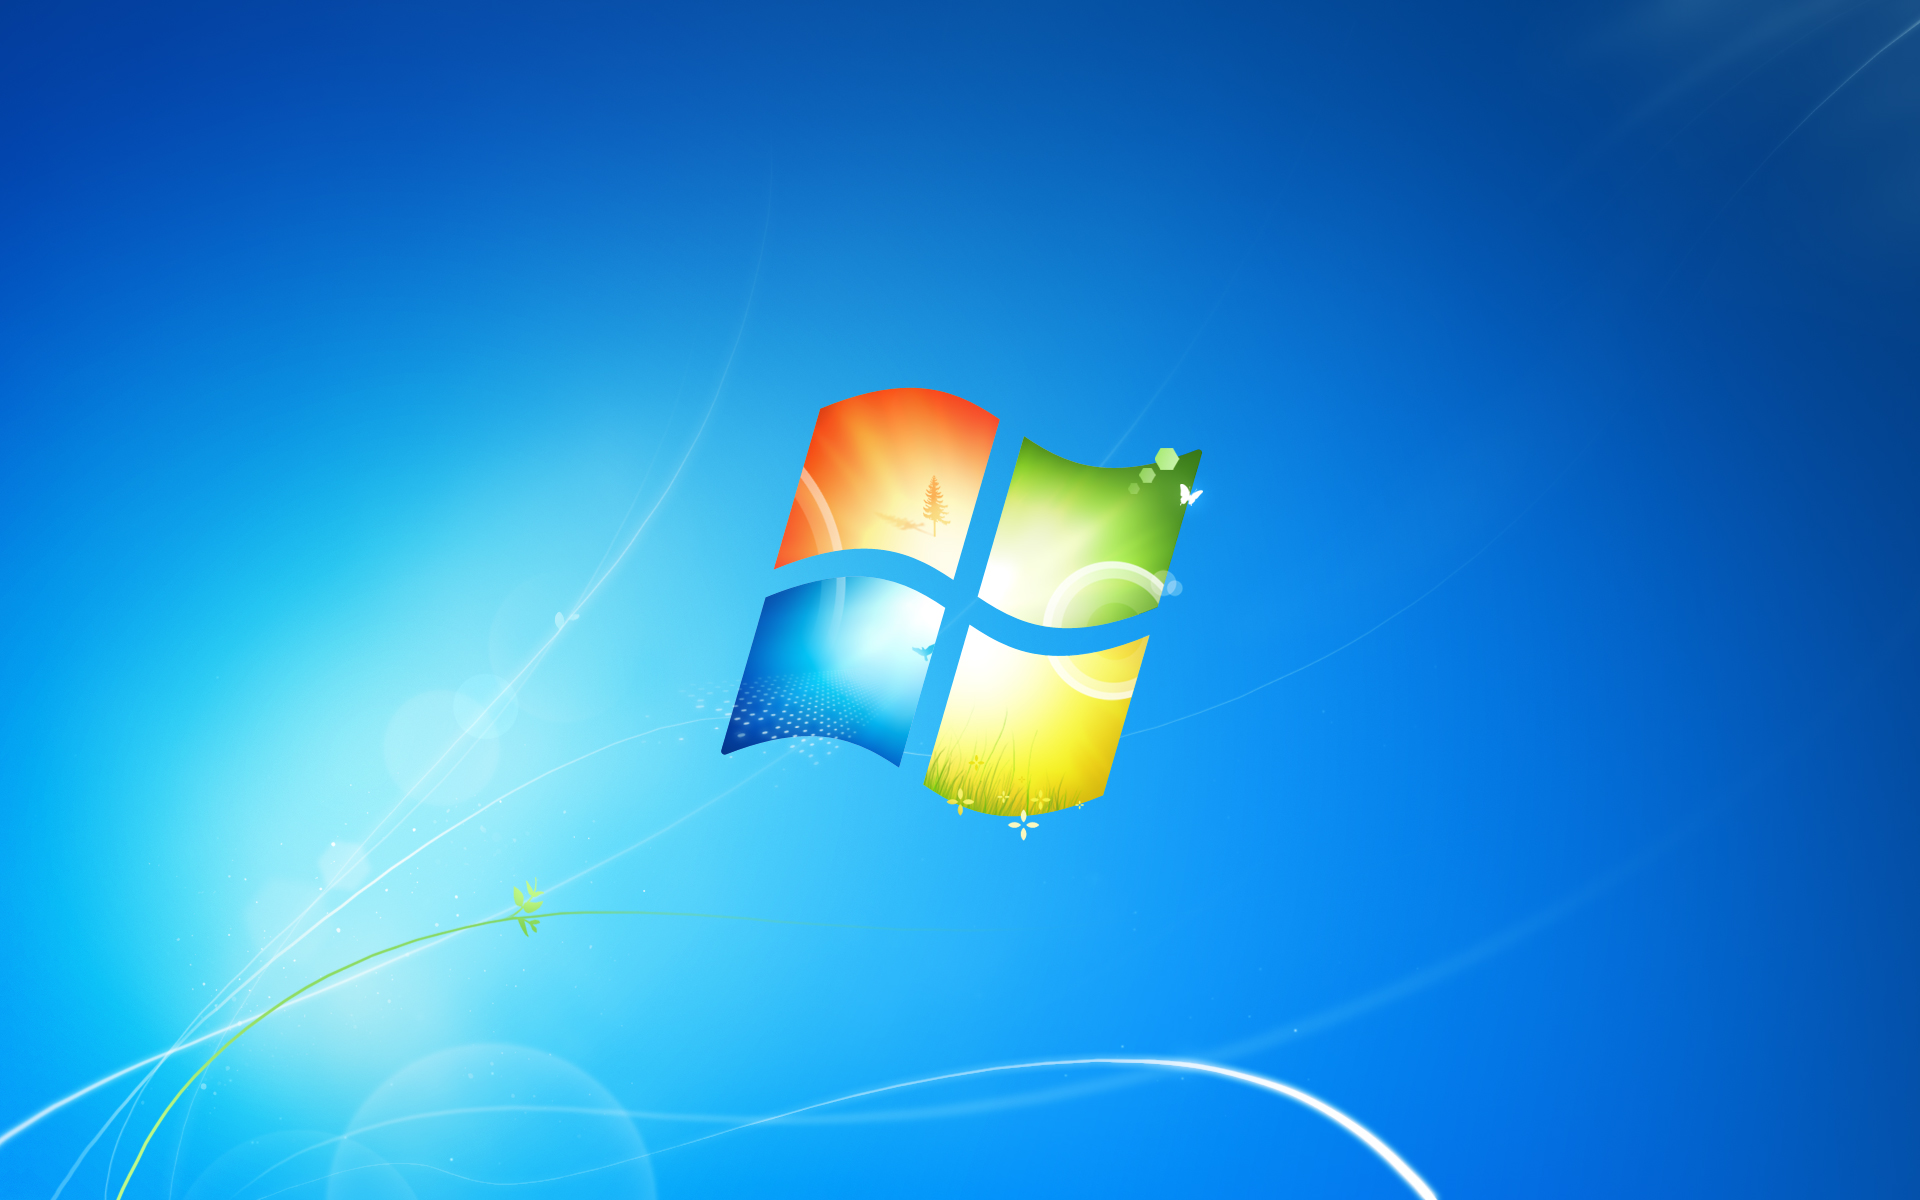 File Name Official Windows Wallpaper Posted Piph Category